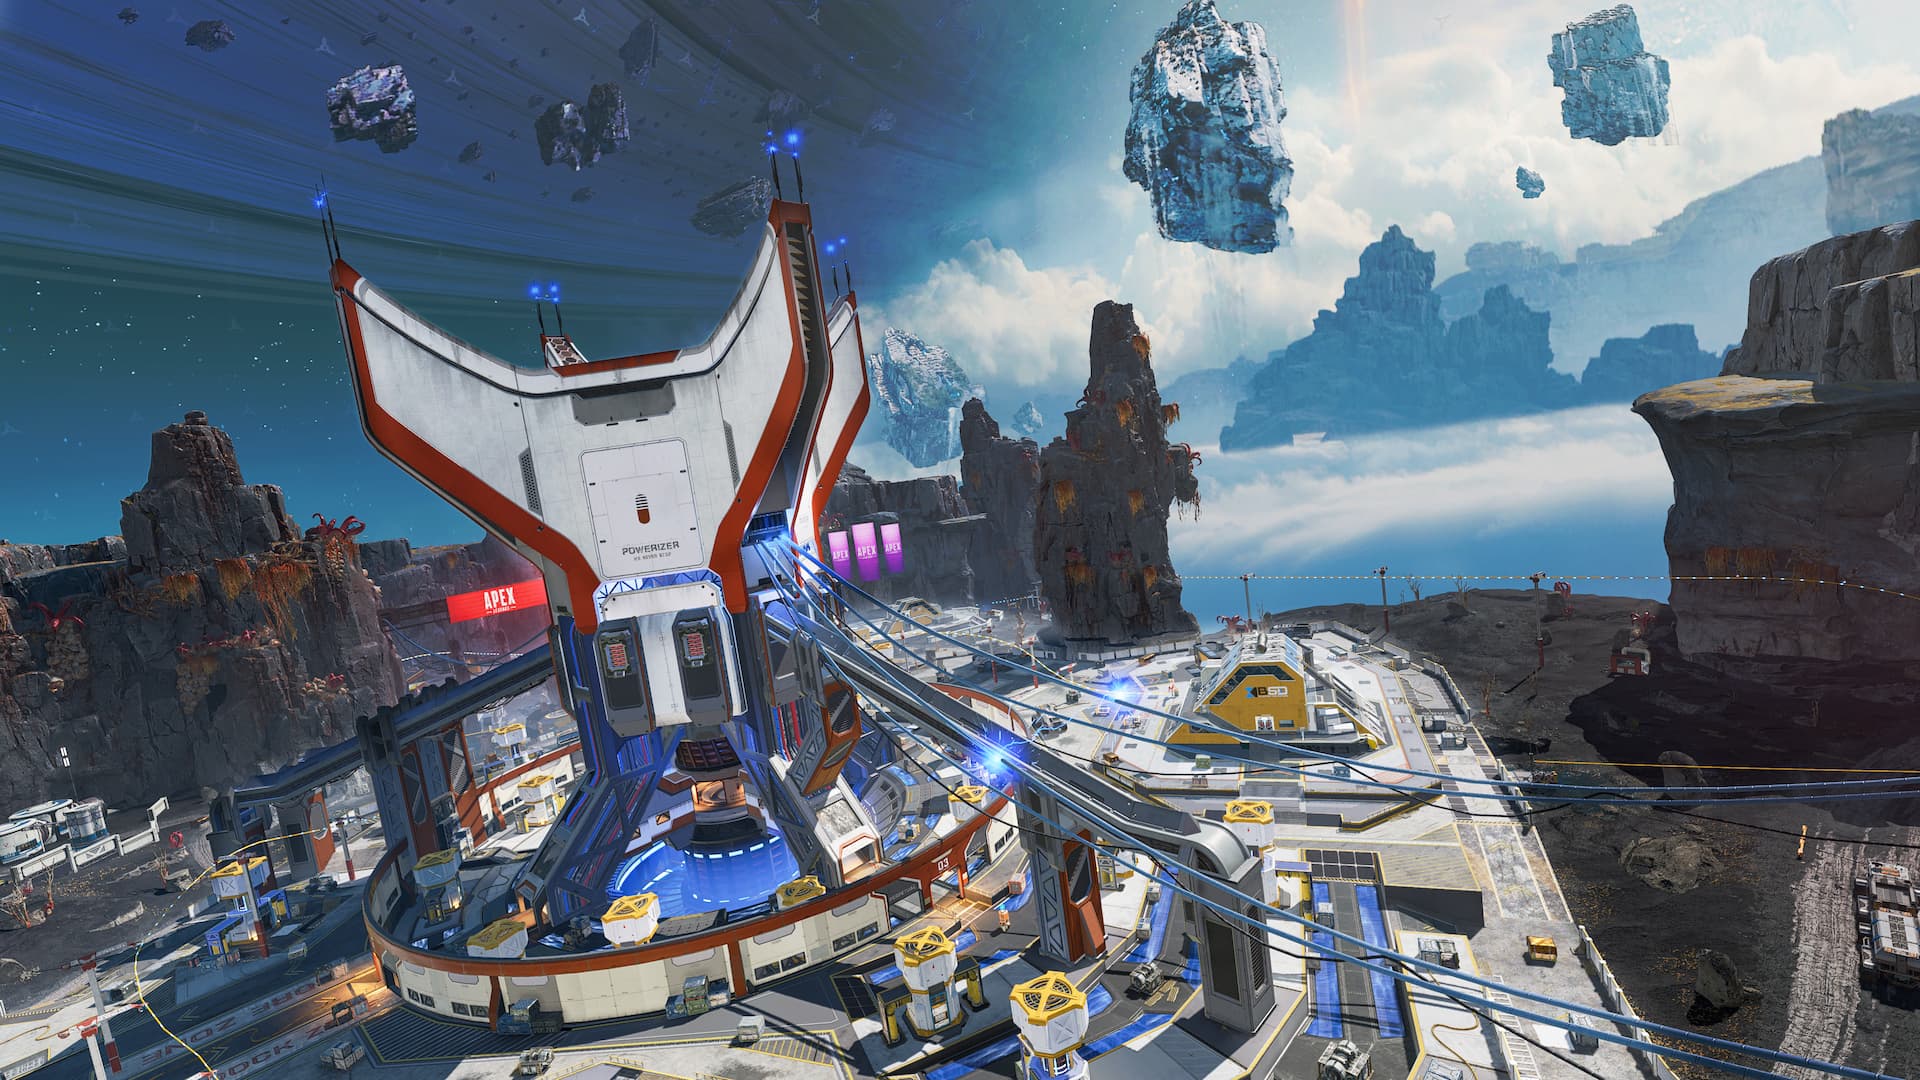 Apex Legends Broken Moon map takes us to Catalyst's home in Season 15: sci-fi cityscape in space